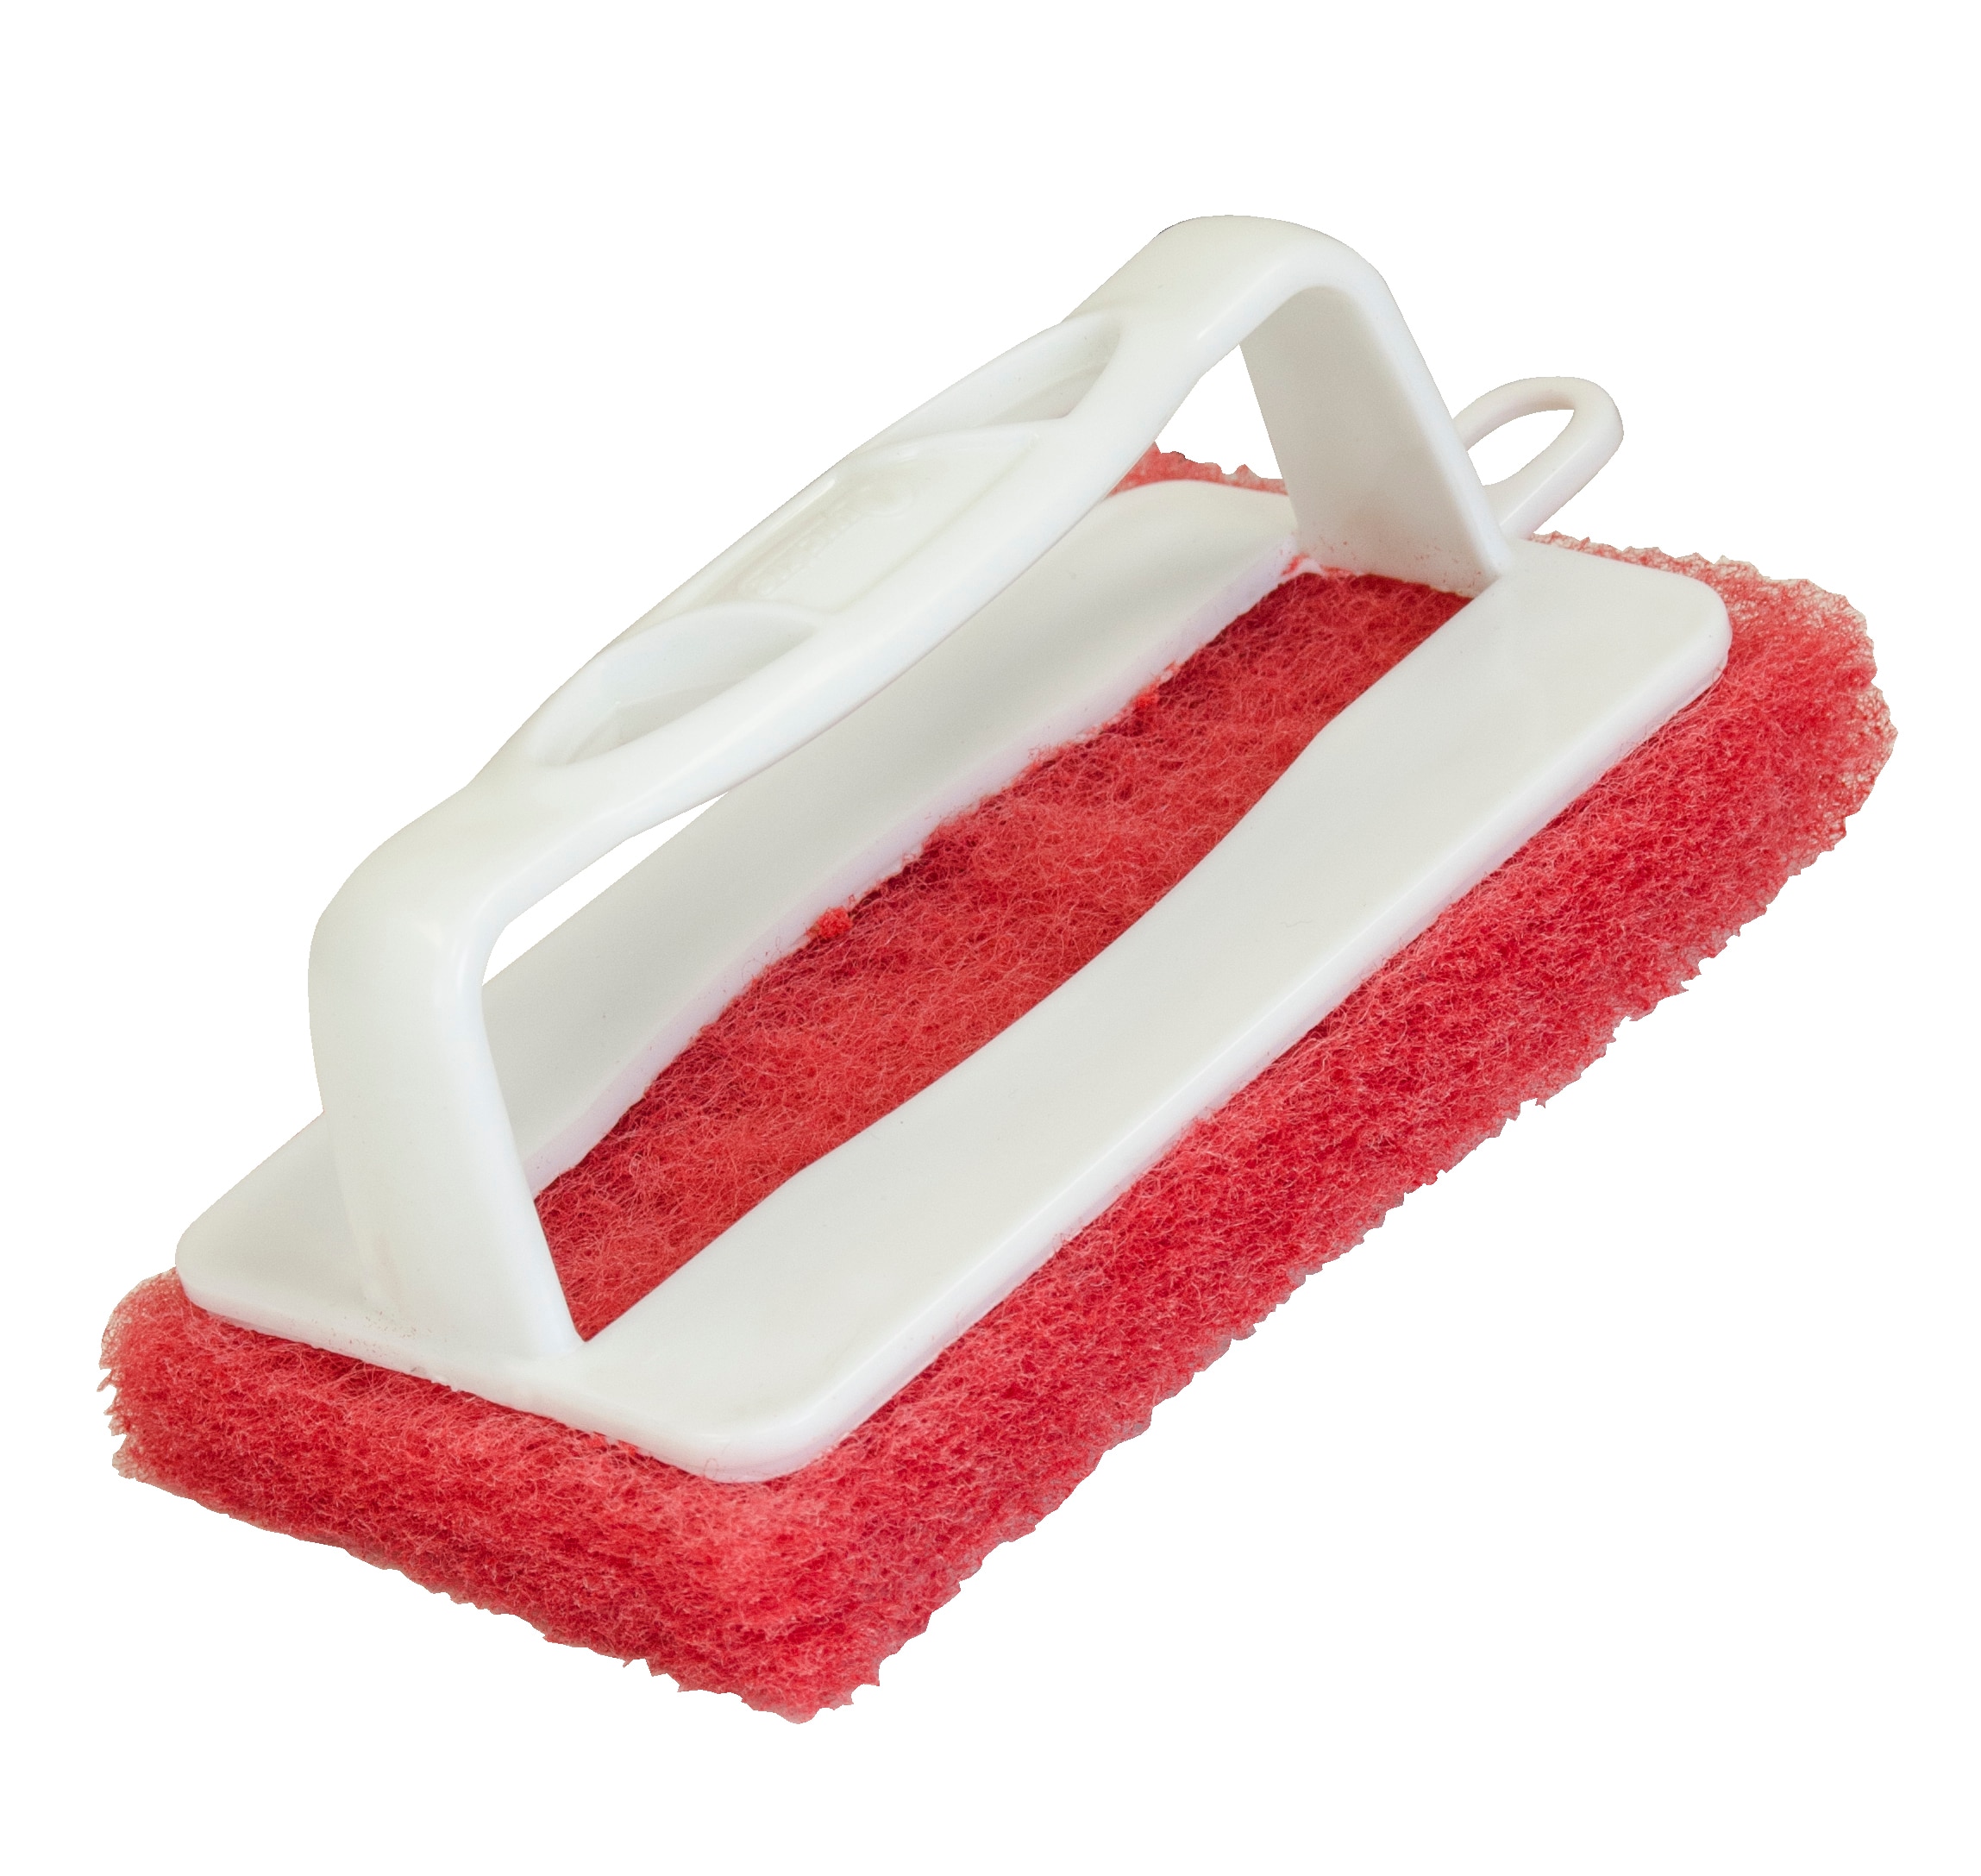 Quickie Manufacturing 116686 Power Scrubber with Grout - Red, 1